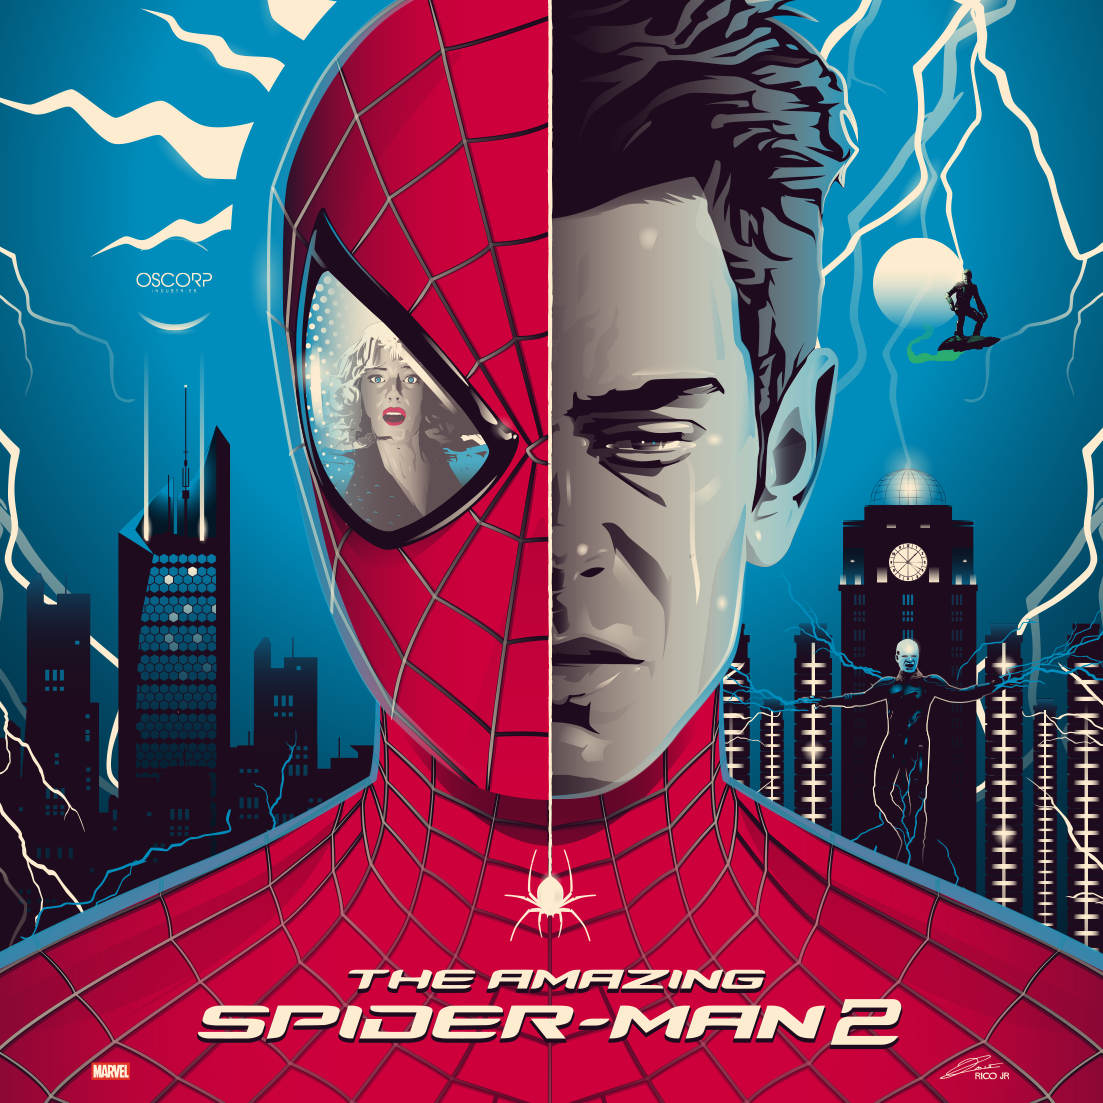 Spider-Man No Way Home Poster (fan made) :: Behance